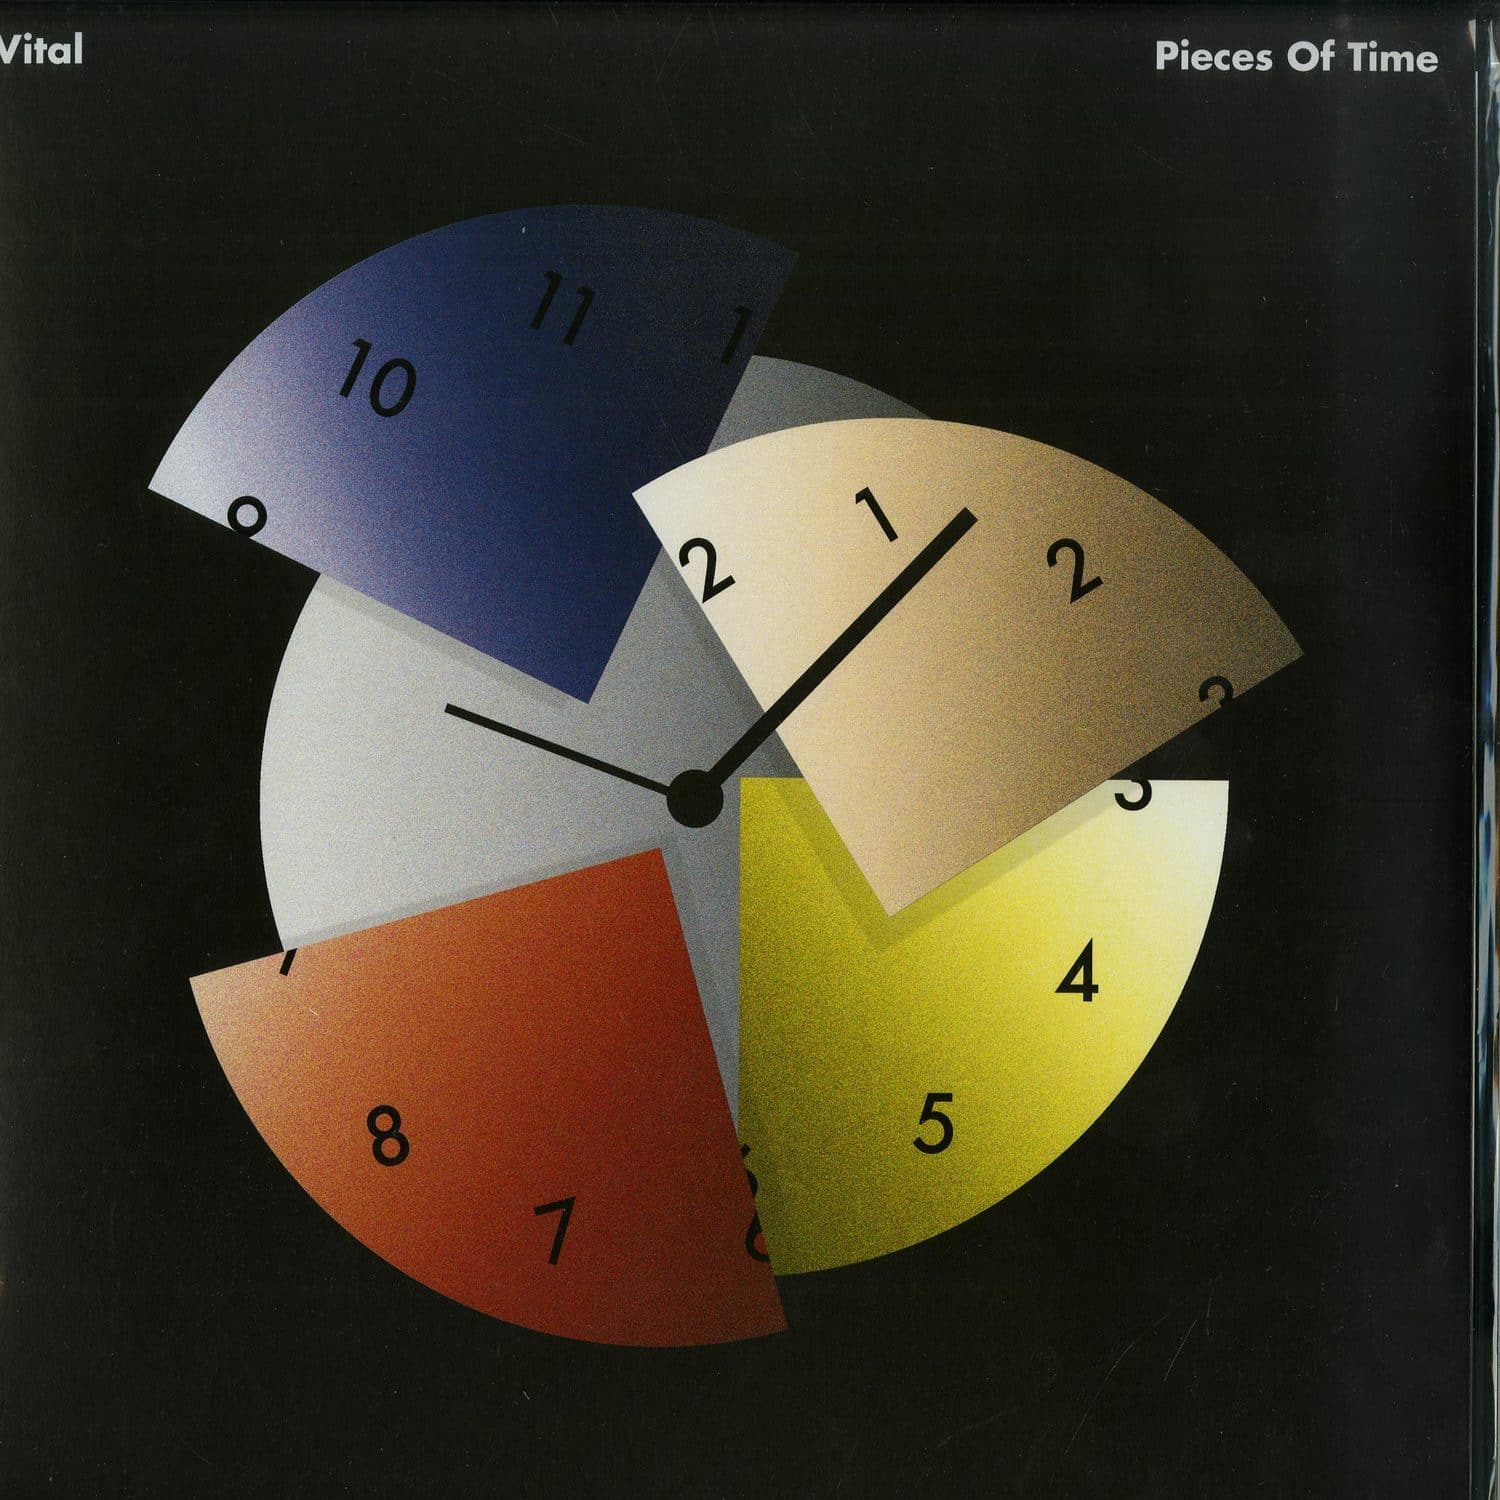 Vital - PIECES OF TIME 